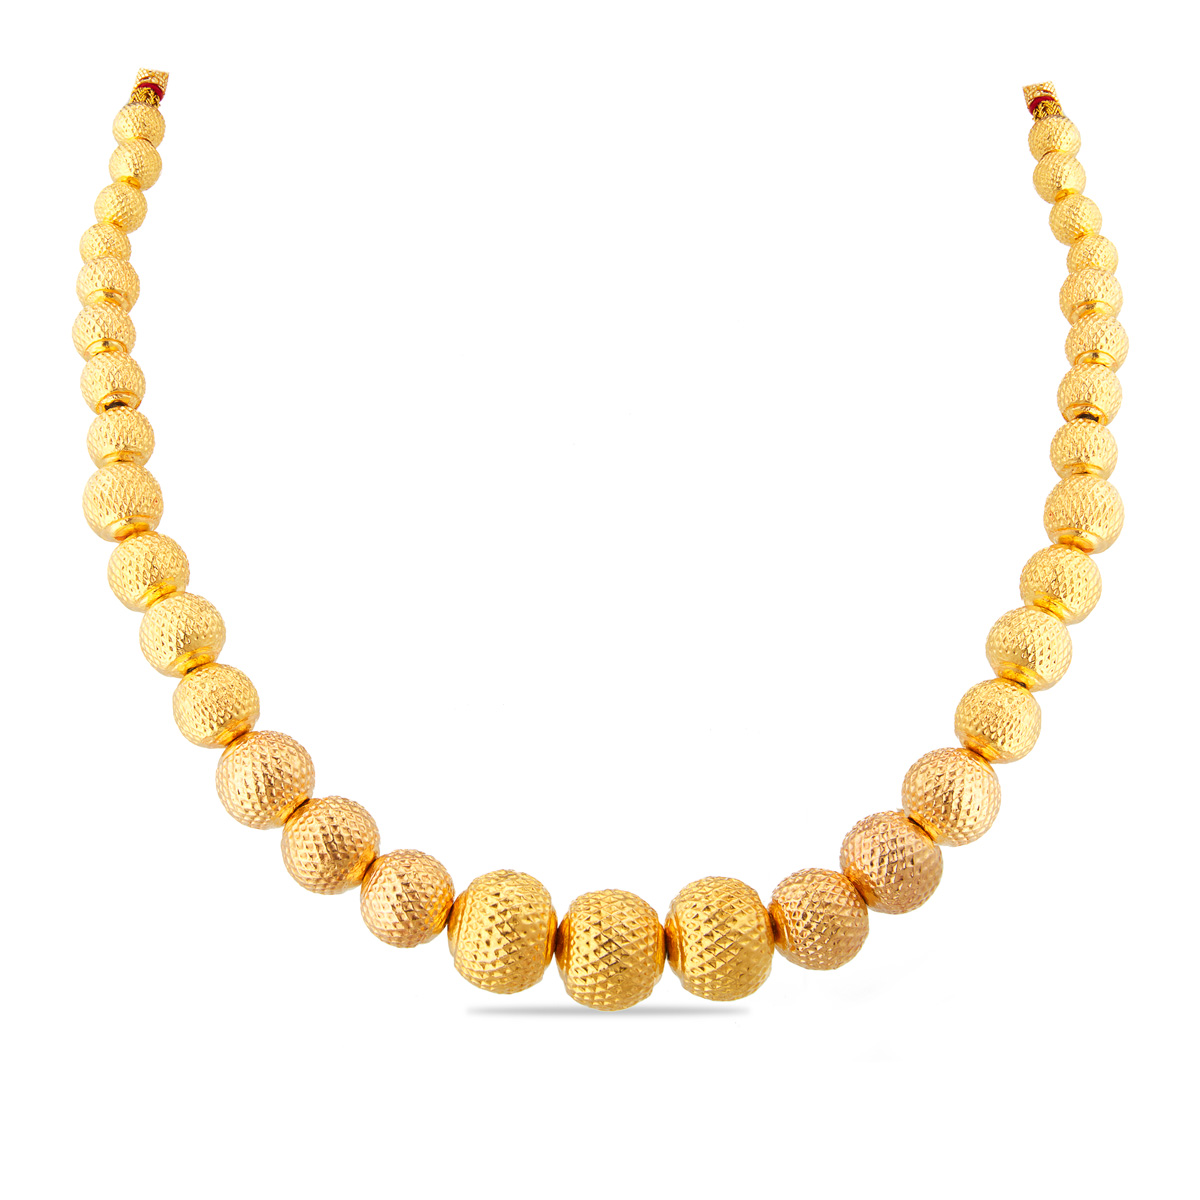 Galena Beads necklace